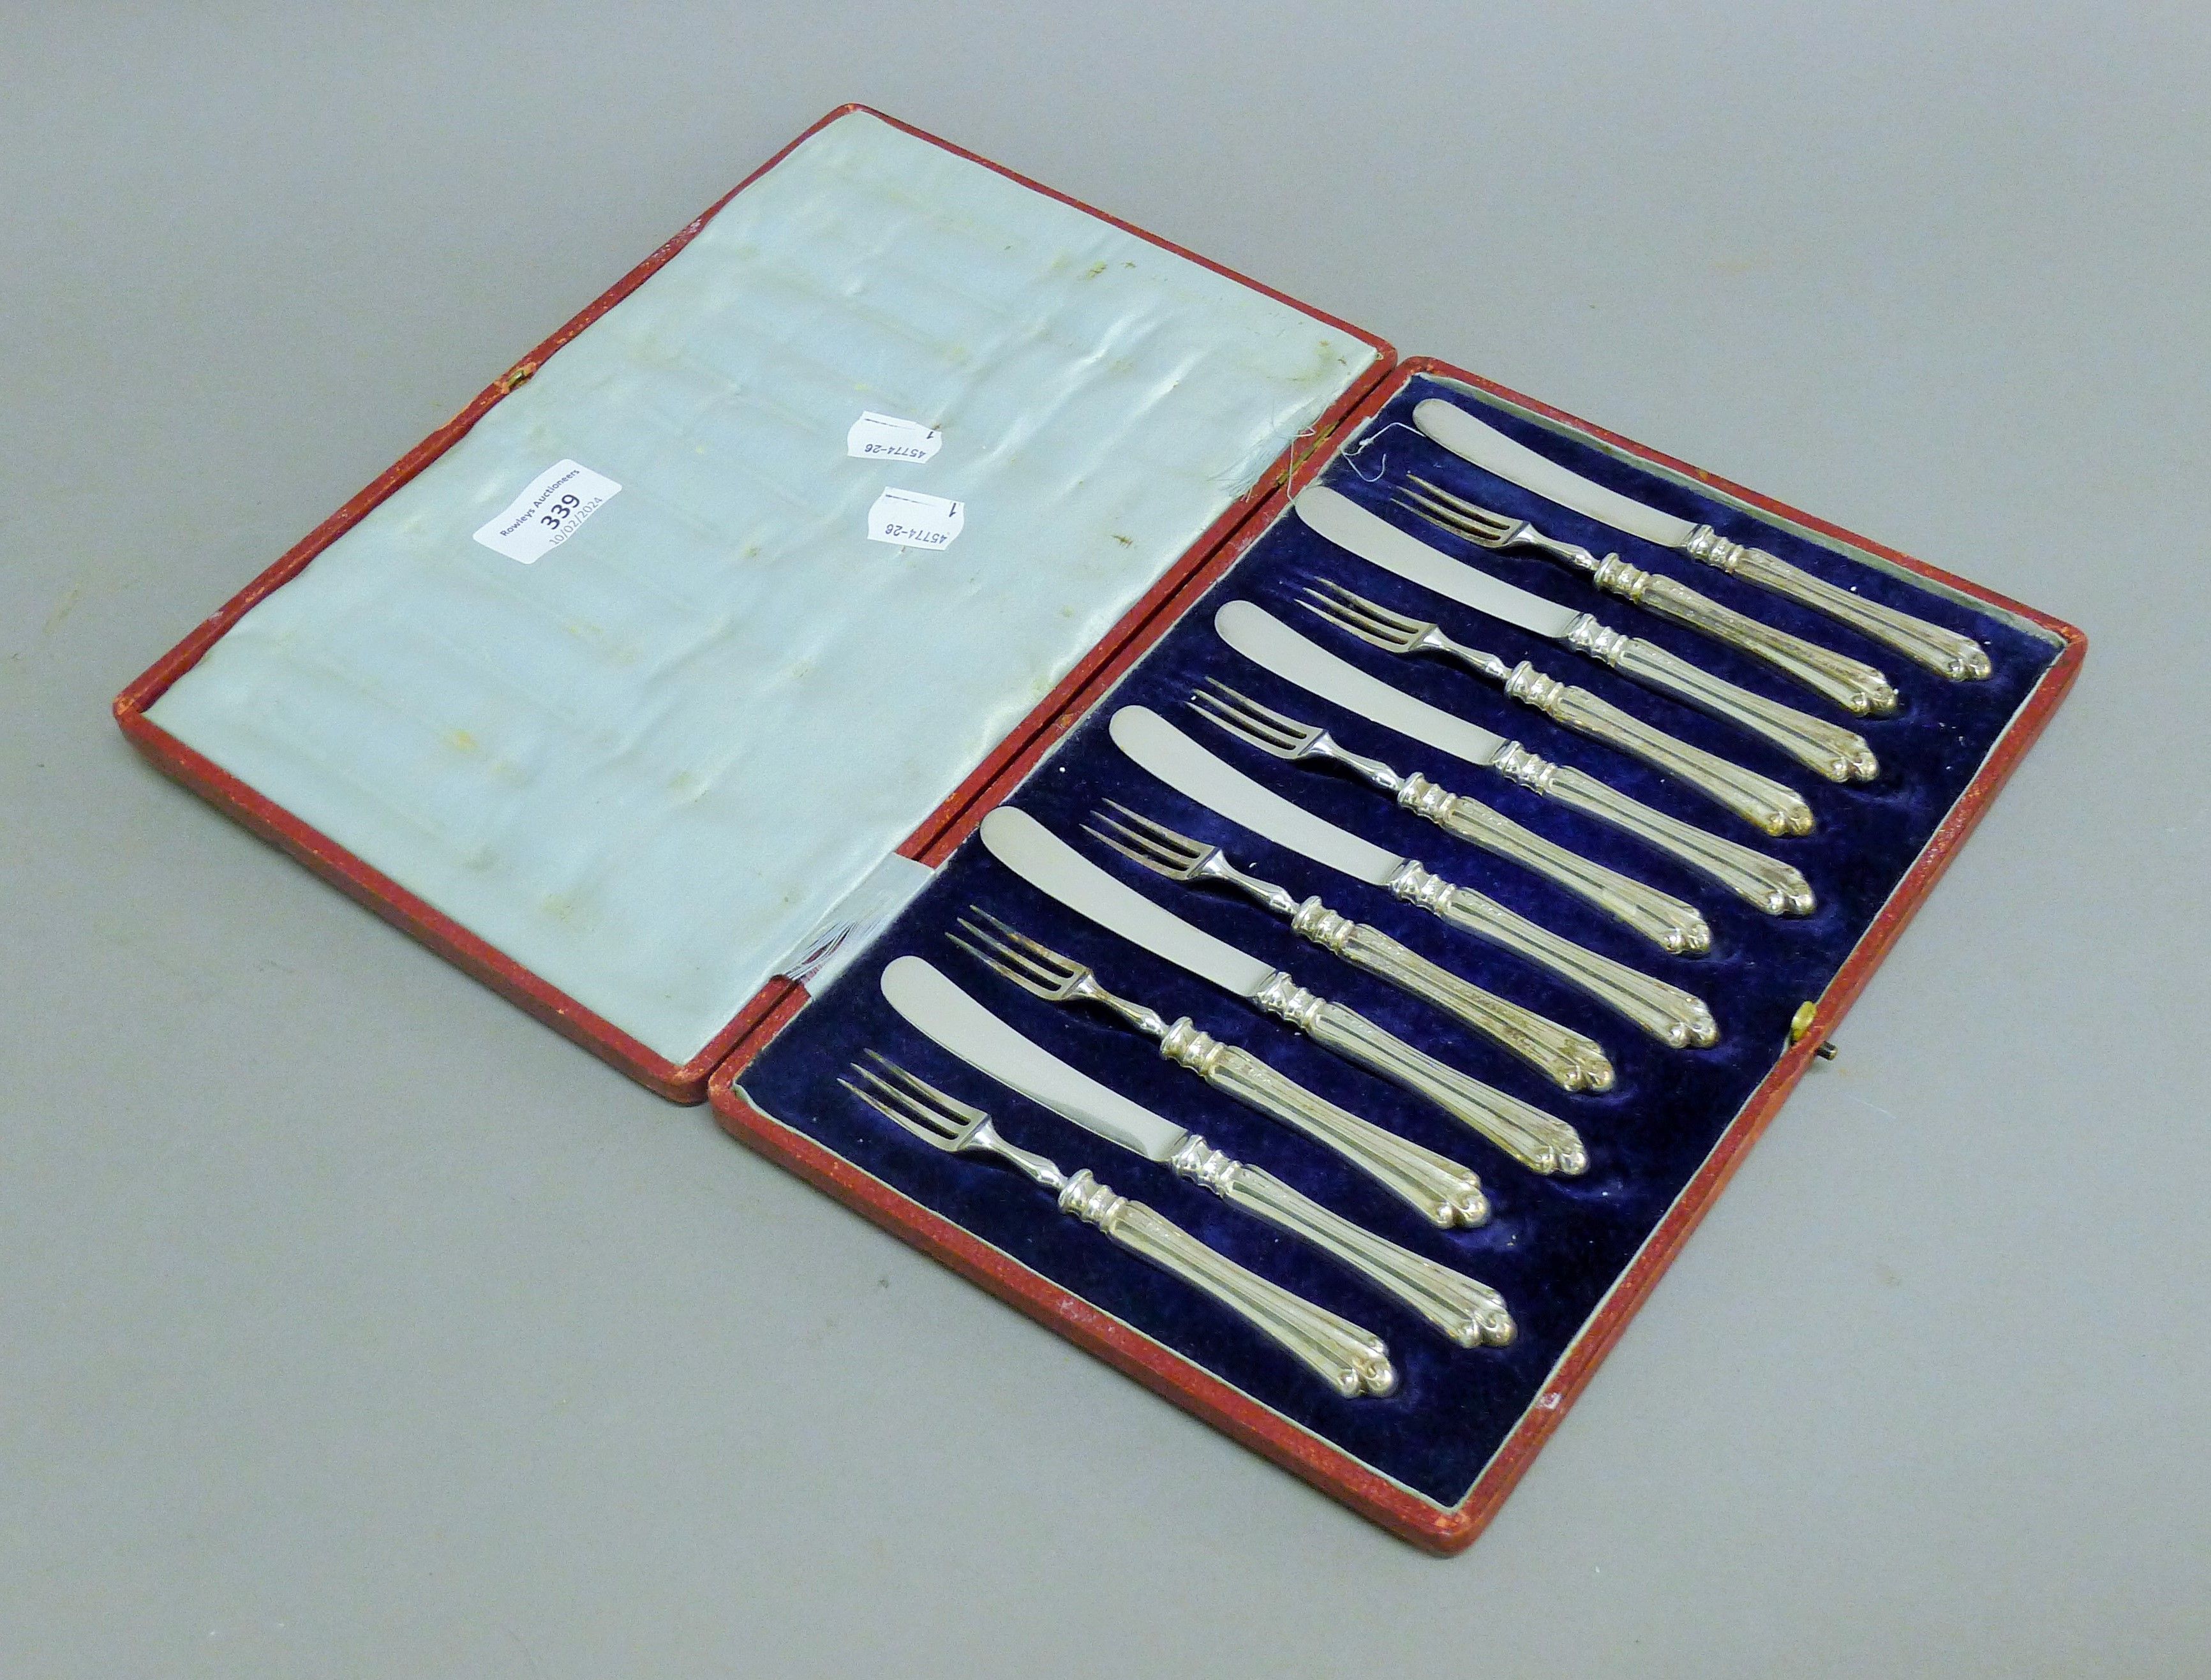 A cased set of silver-handled dessert knives and forks. The box 30 cm wide.